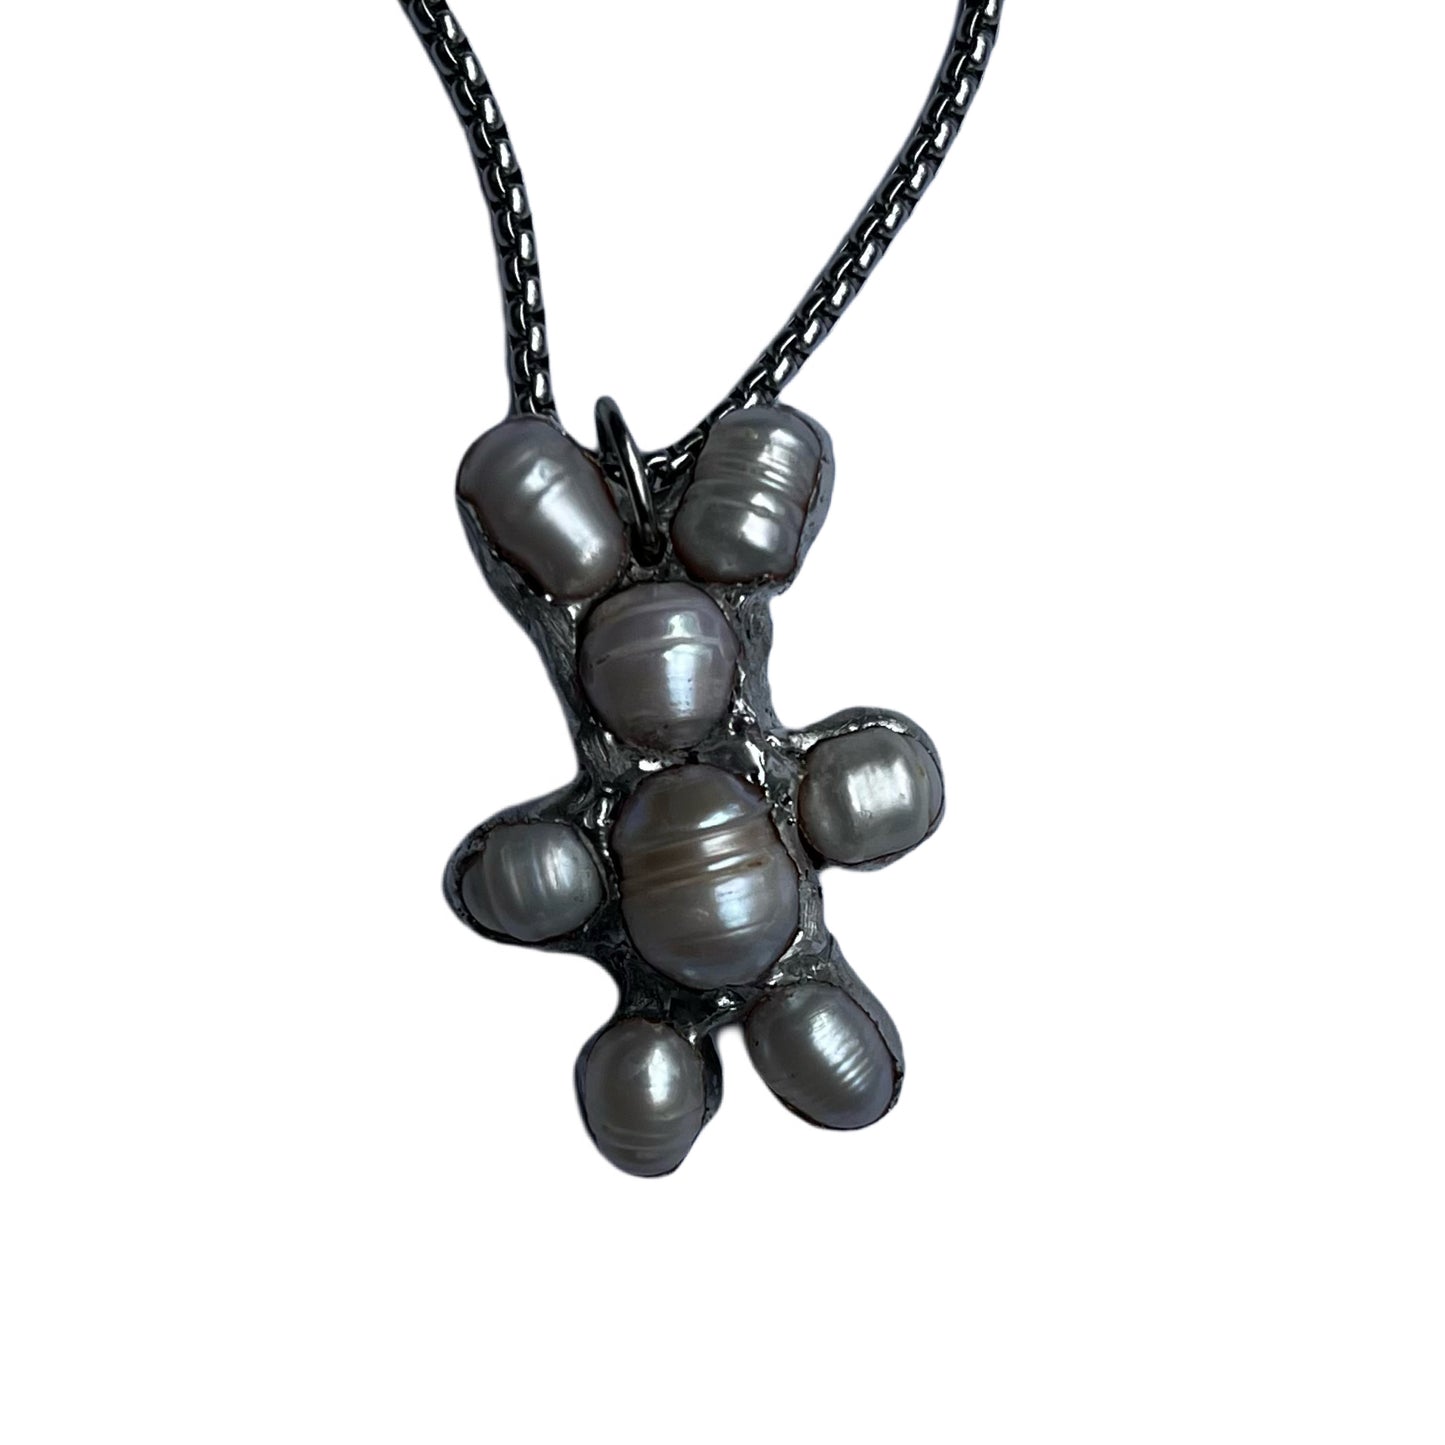 The Bunny Pendent